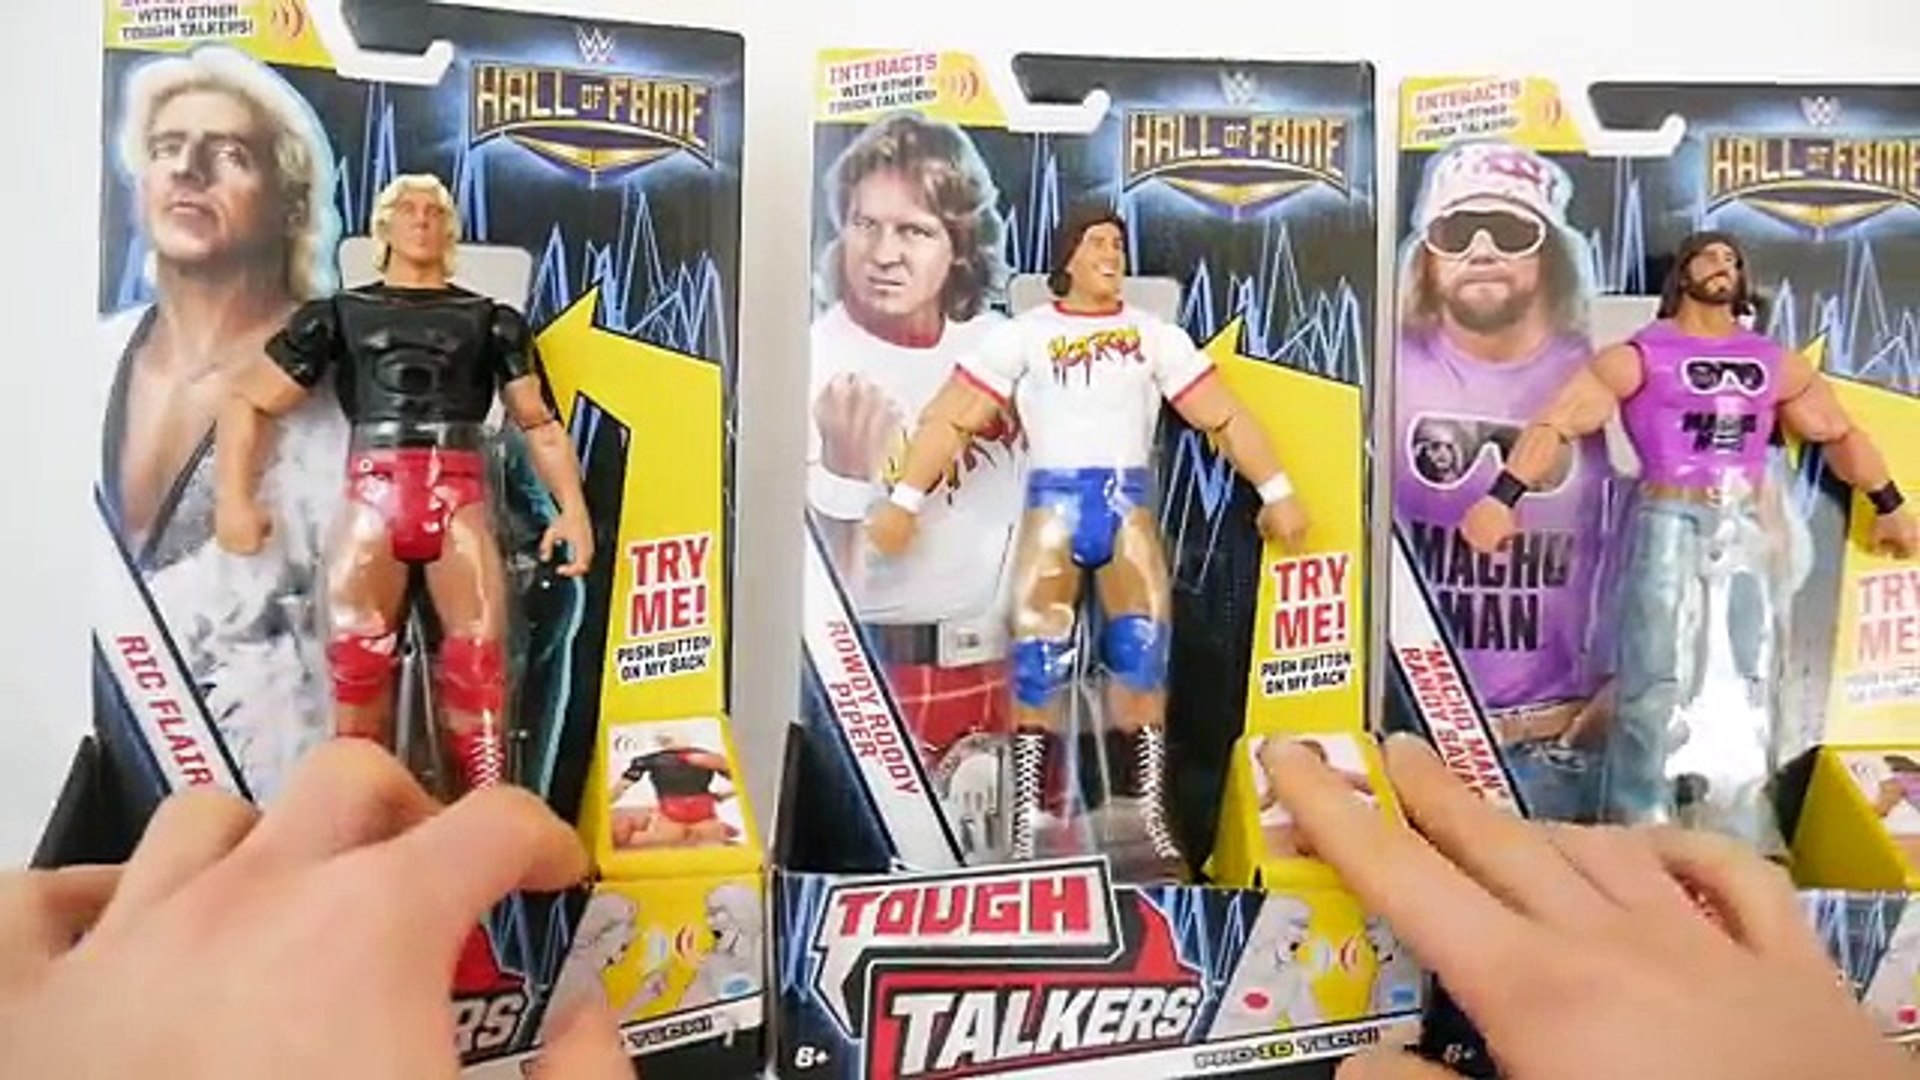 ⁣WWE Tough Talkers Target Exclusive Ric Flair, Macho Man & Roddy Piper Toy Set Unboxing & R